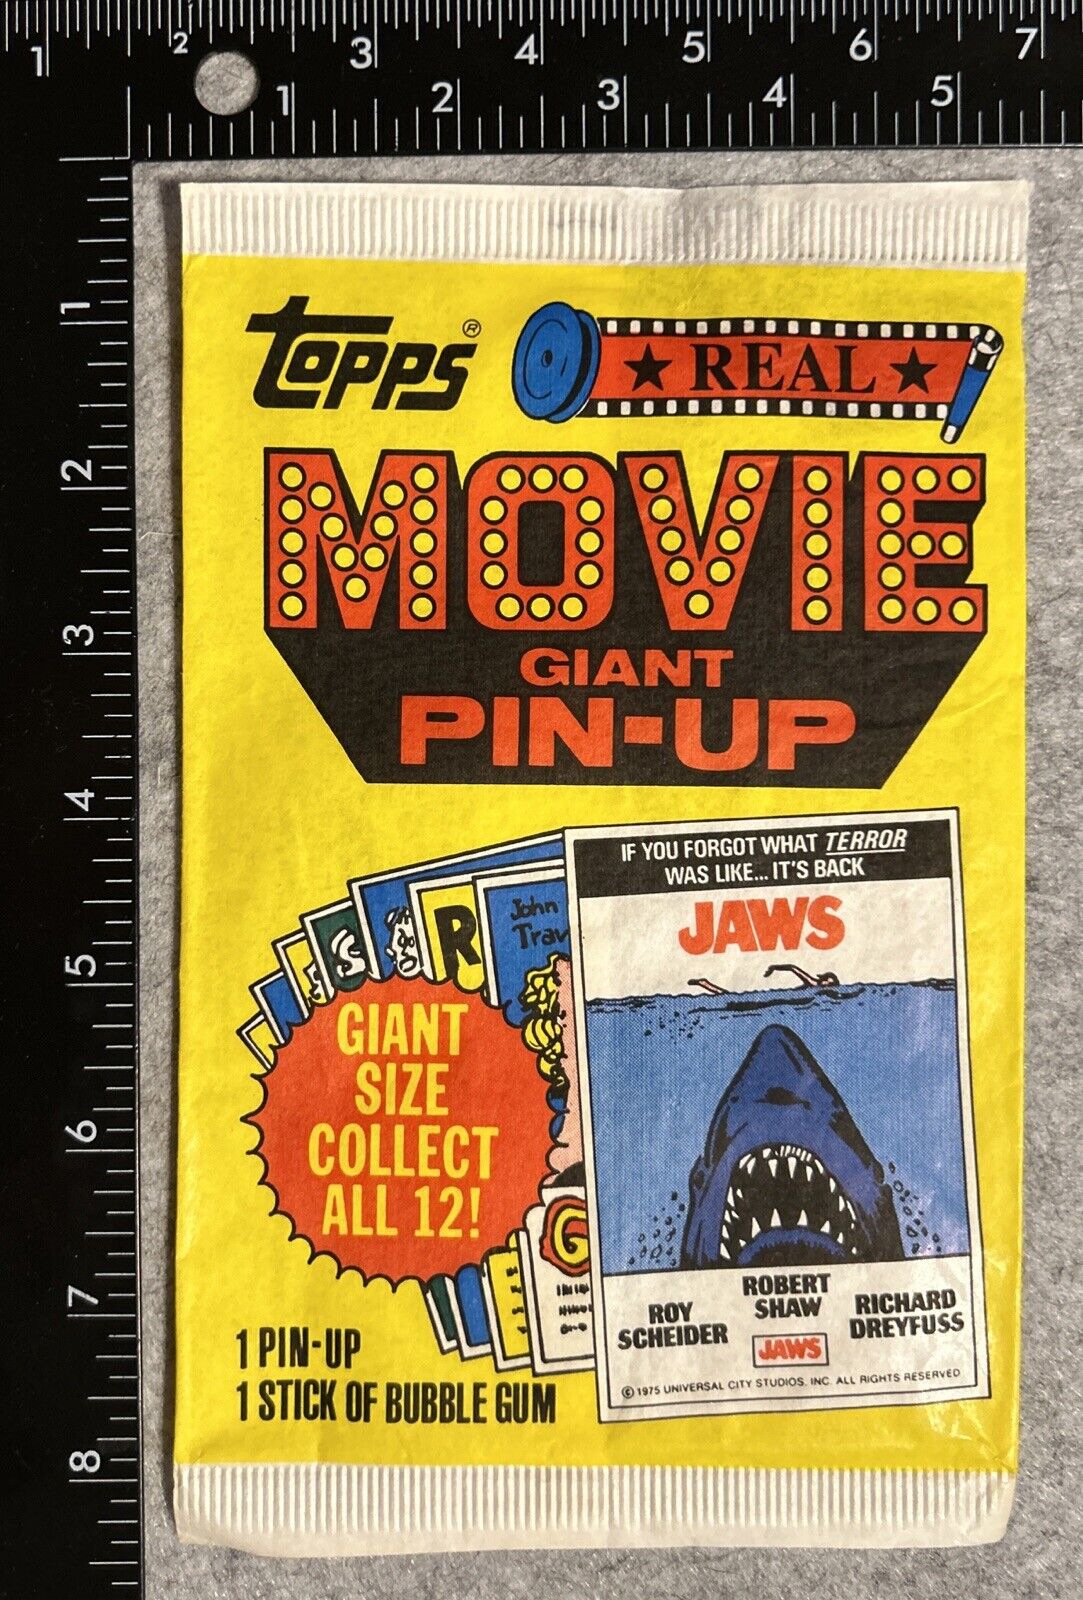 1981 TOPPS MOVIE GIANT PIN-UP WRAPPER